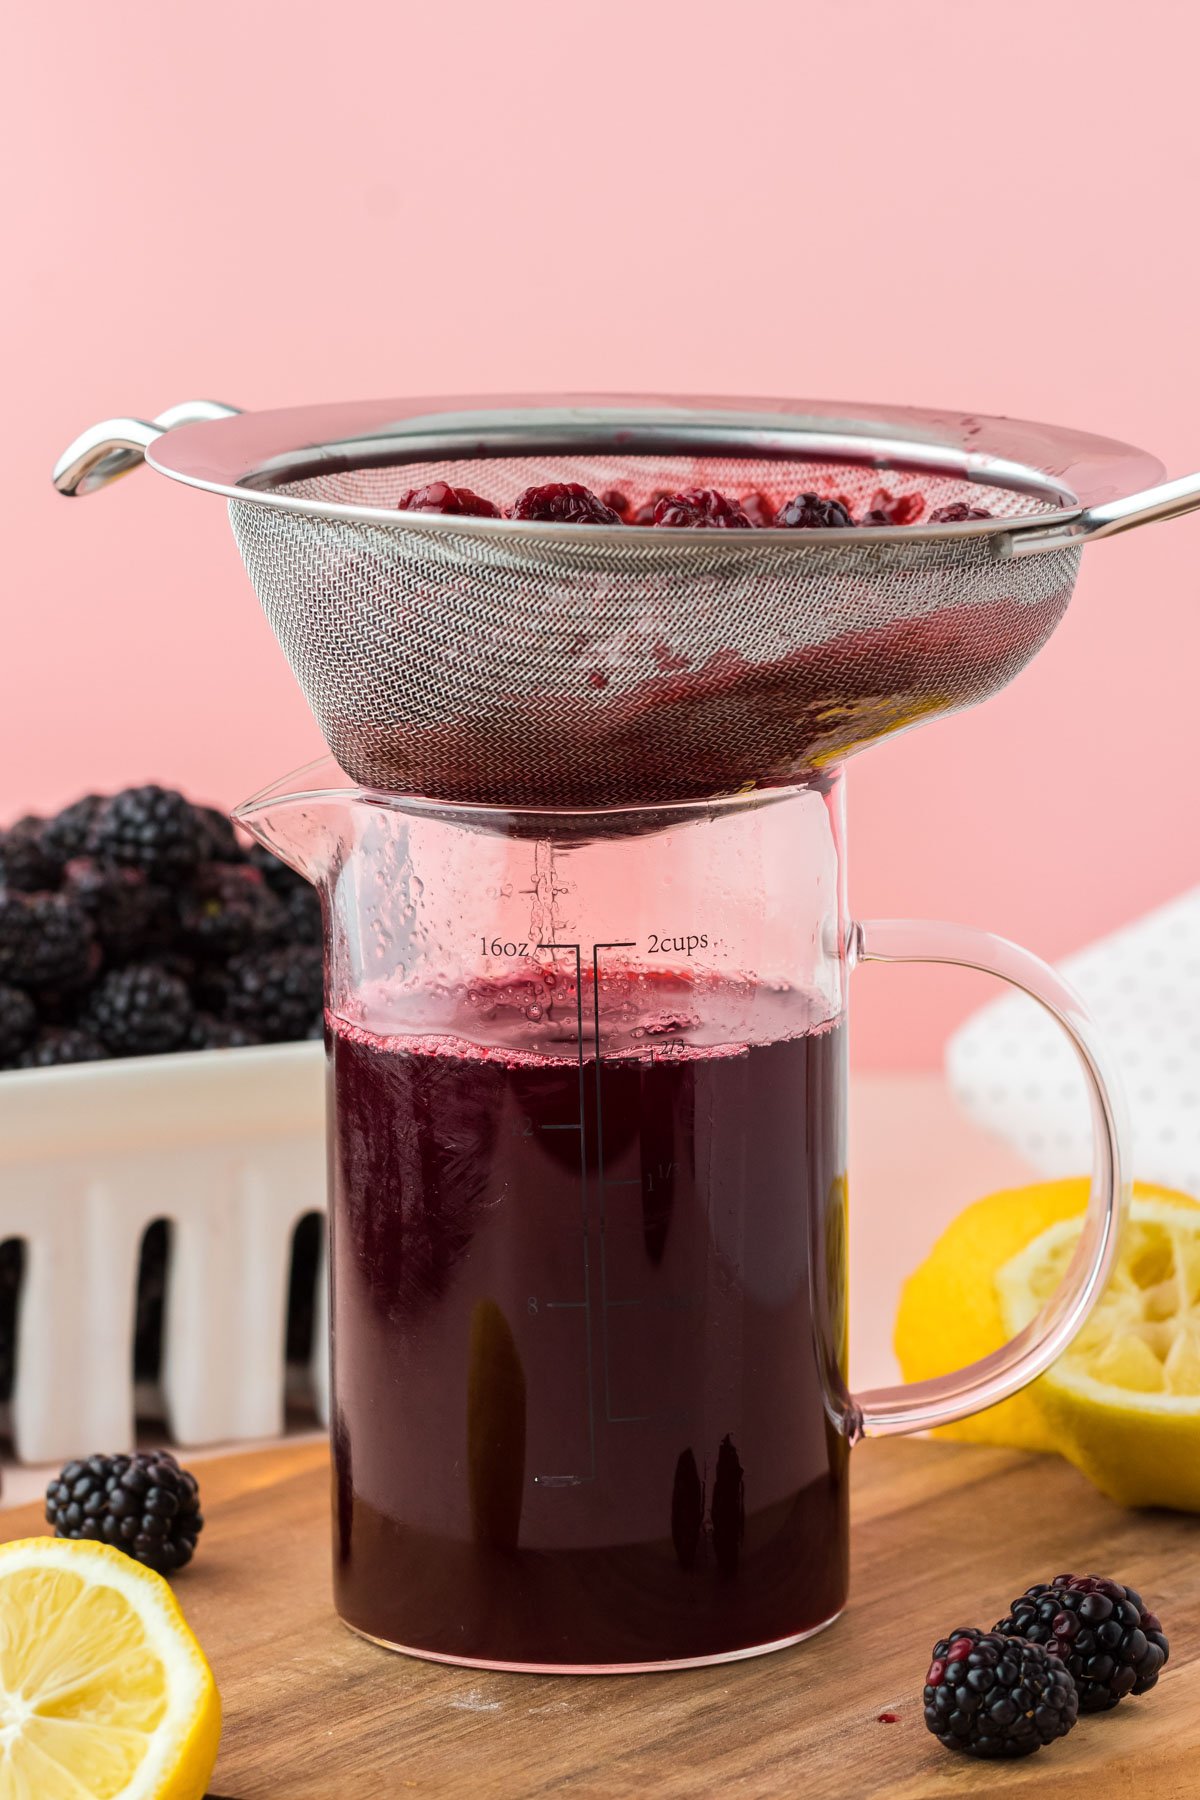 A fine mesh sieve straining blackberry simple syrup into a measuring cup.